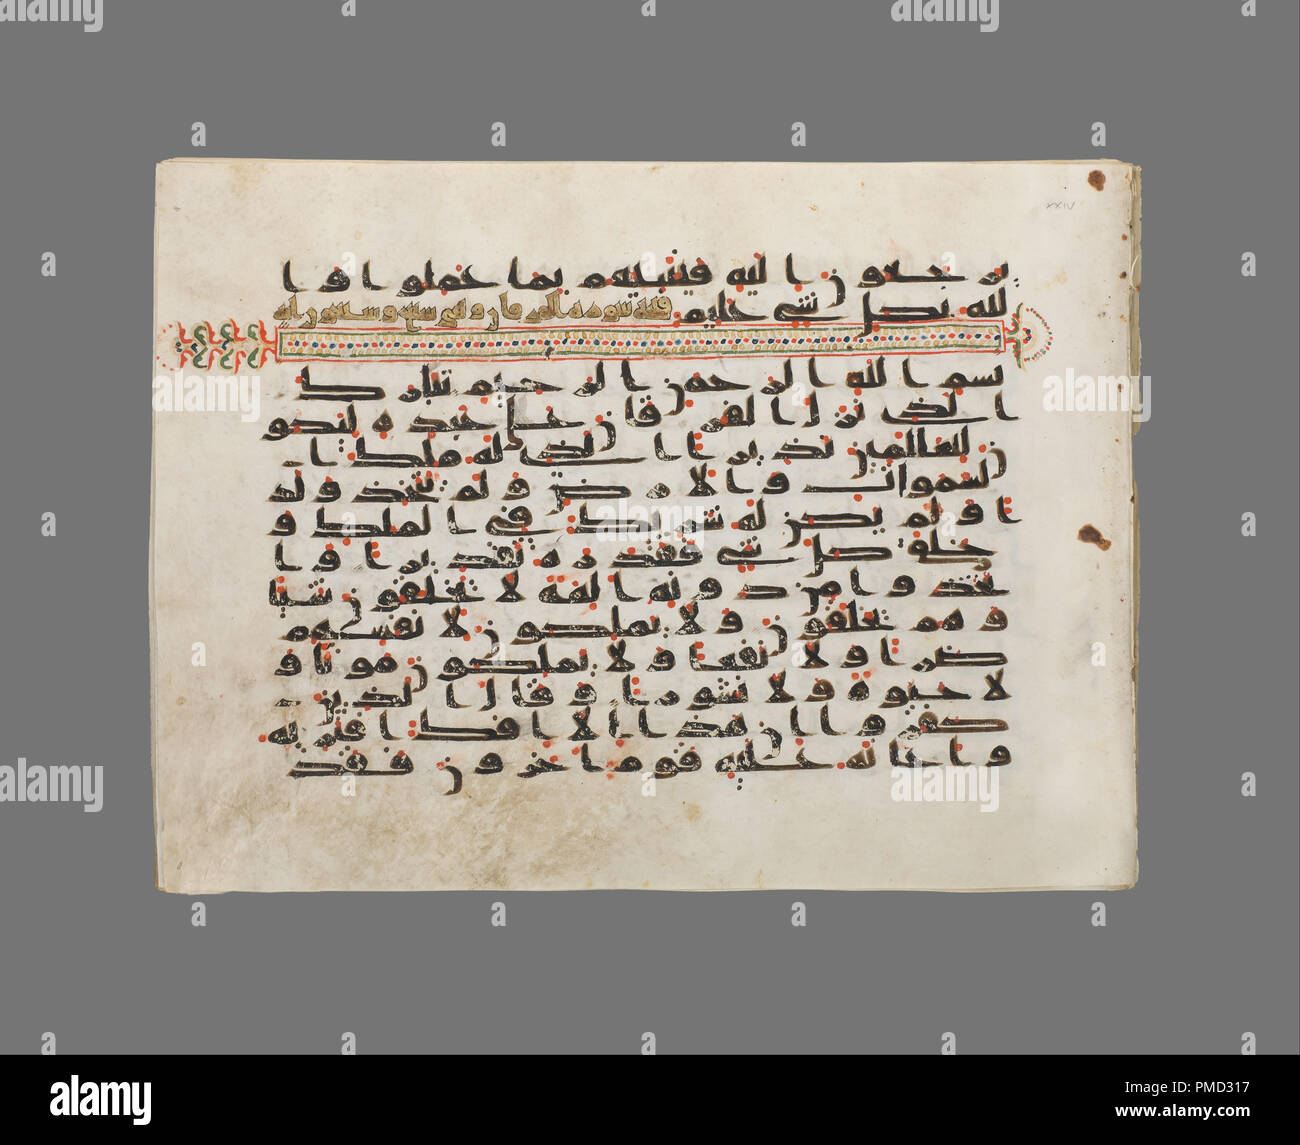 Qur'an Section. Date/Period: 700 - 800. Manuscript. Height: 226 mm (8.89 in). Author: UNKNOWN. Stock Photo